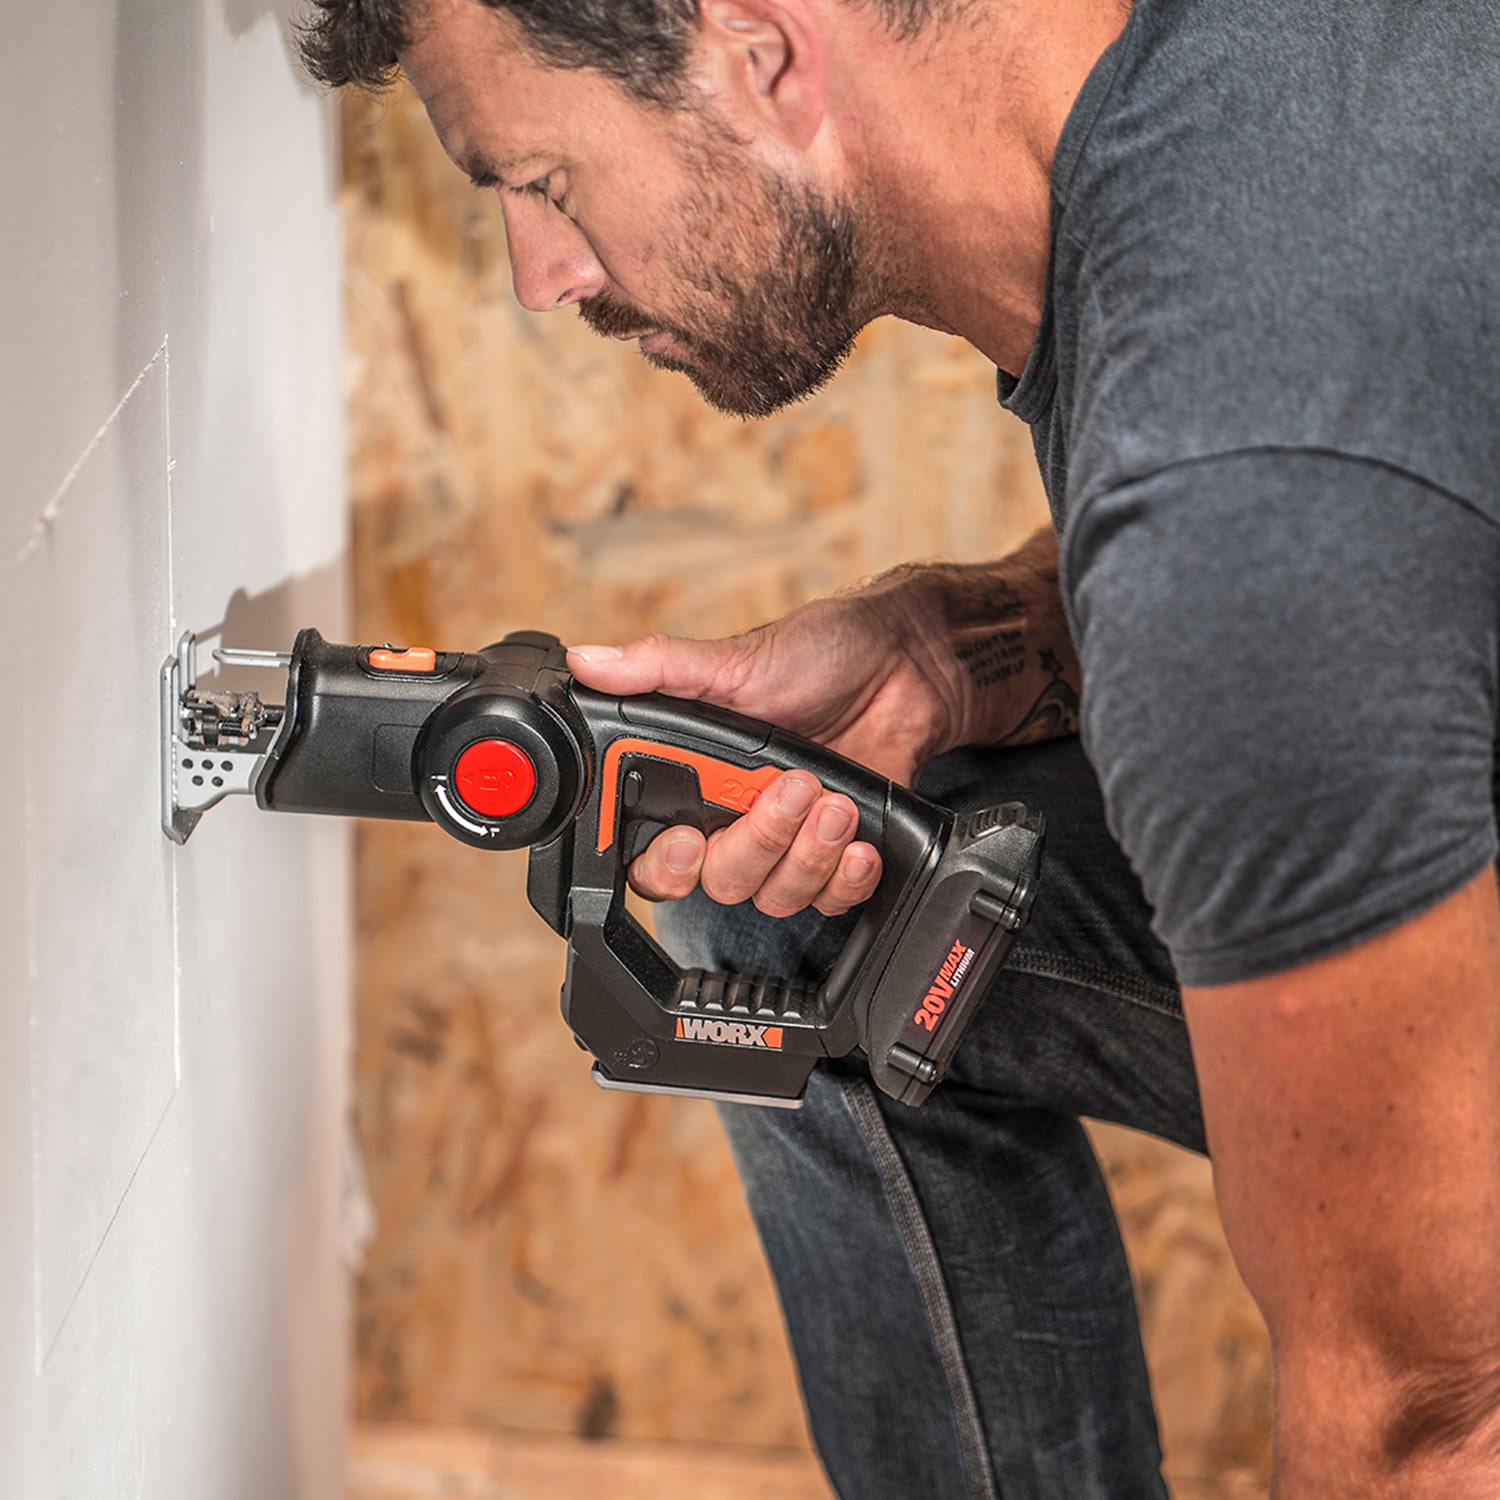 Worx 20V Axis 2-in-1 Reciprocating Saw and JigSaw 